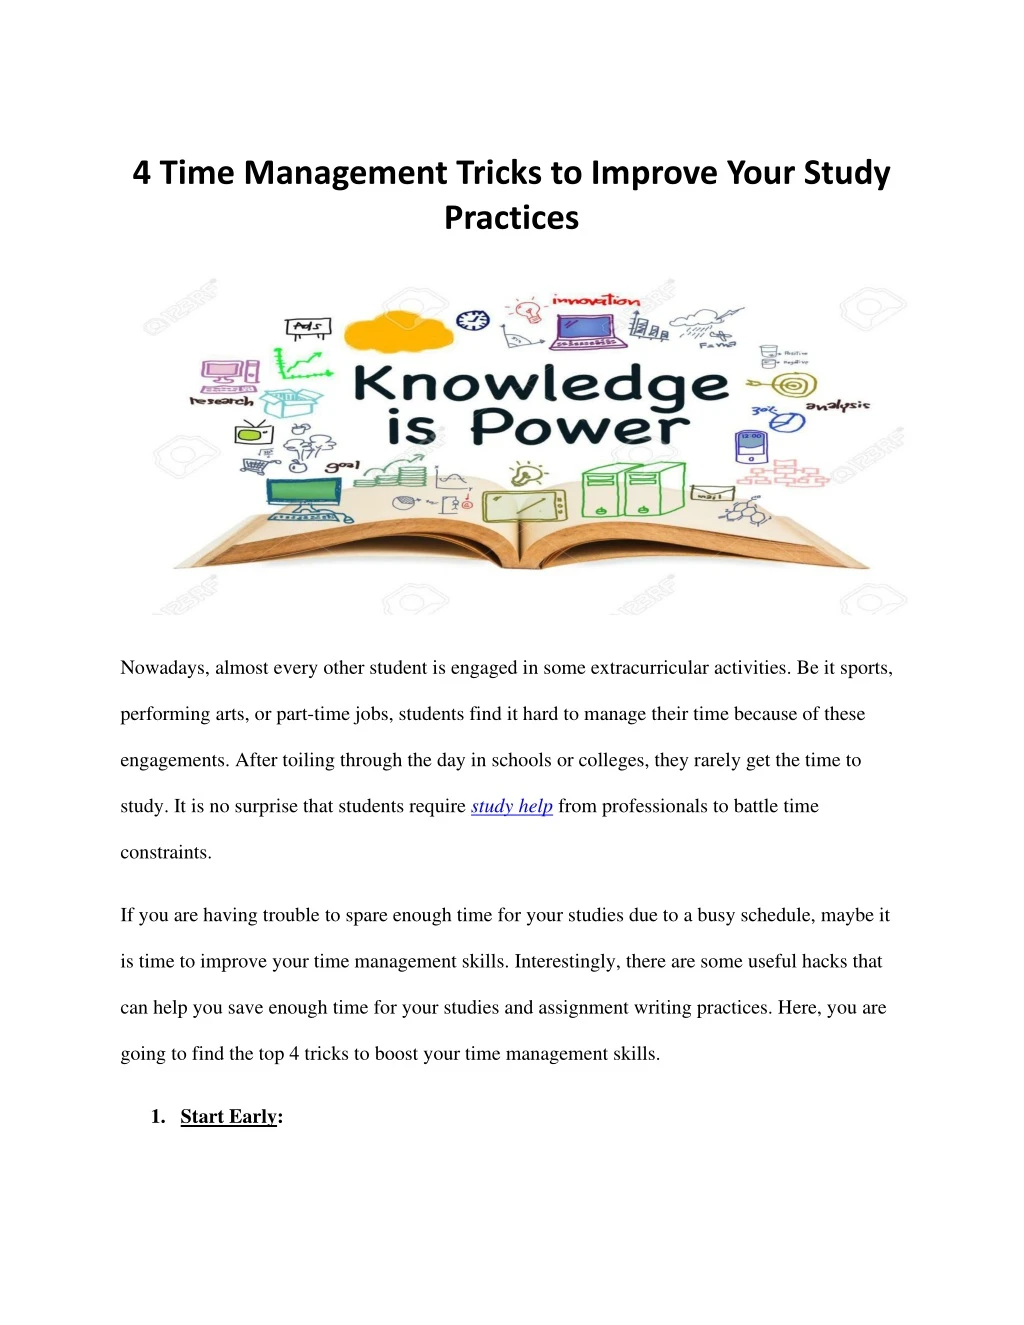 4 time management tricks to improve your study